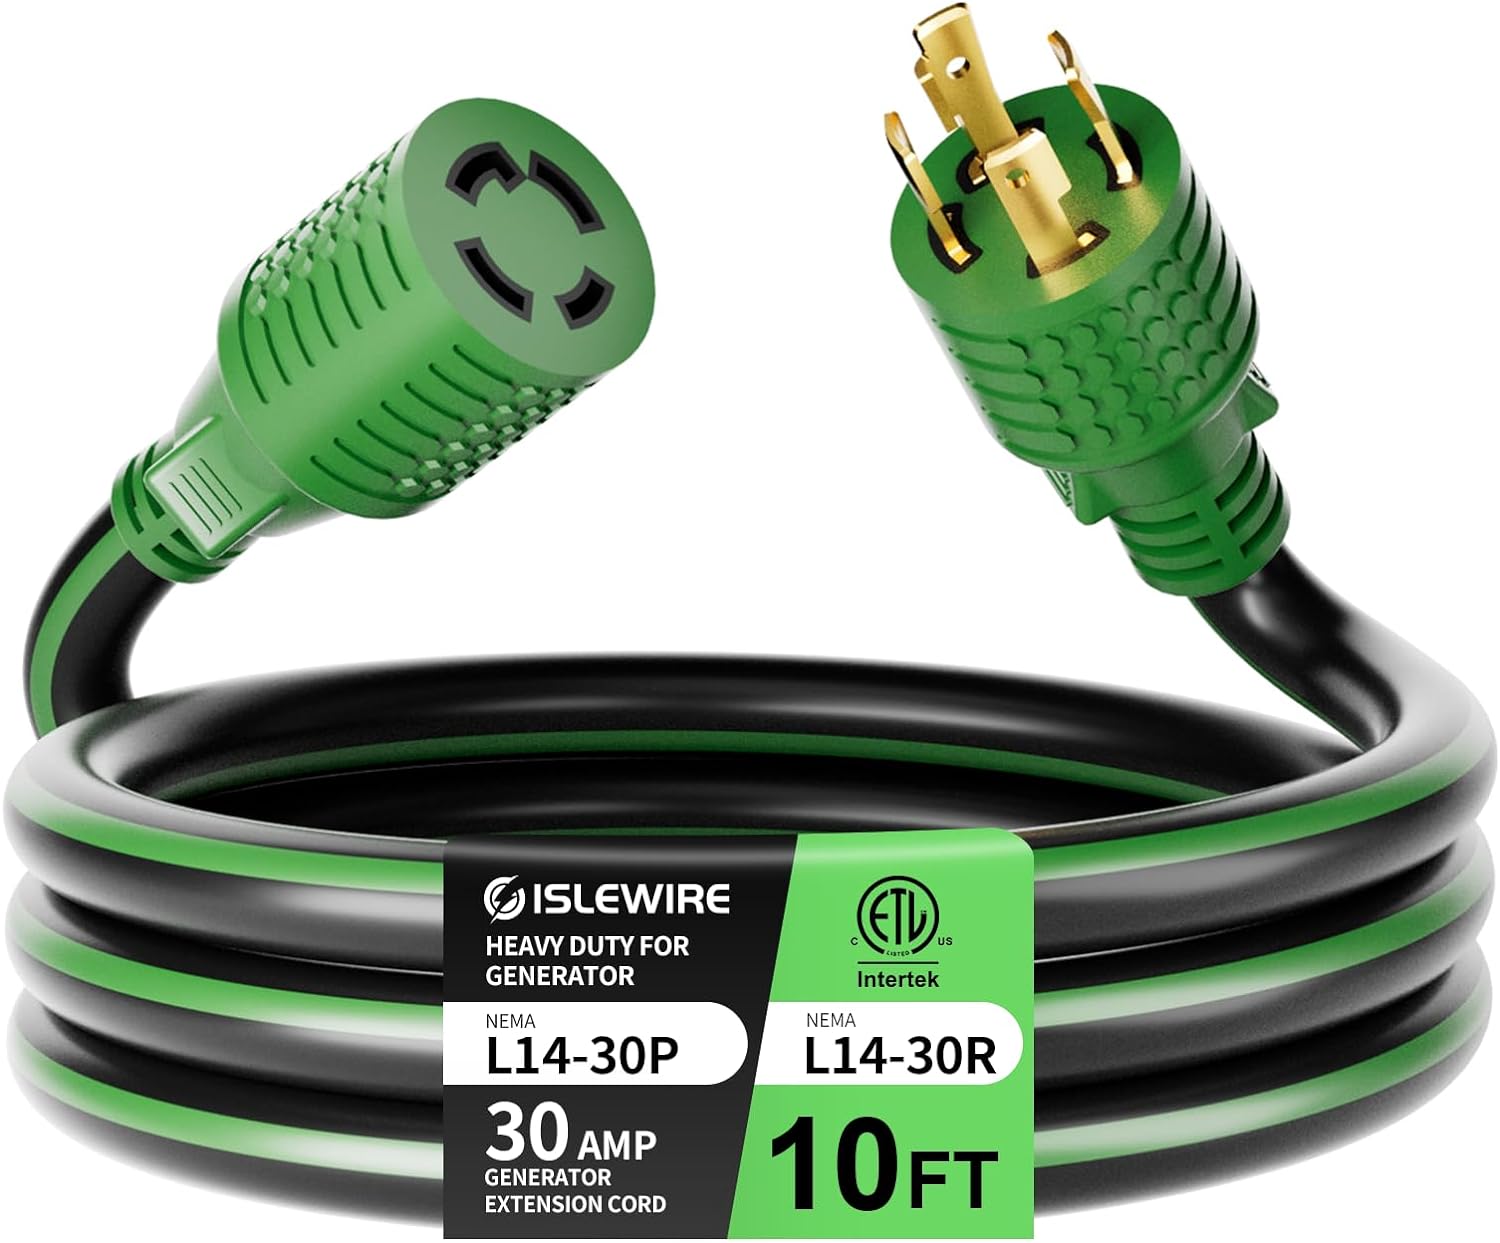 ISLEWIRE 4 Prong 30 Amp Extension Generator Cord 50FT, NEMA L14-30P/L14-30R, 125/250 Volt Up to 7500 Watts, 10 Gauge SJTW Twist Lock Power Cord for Manual Transfer Switch, BlackGreen, ETL Listed - ISLEWIRE 4 Prong 30 Amp Extension Generator Cord 50FT Review